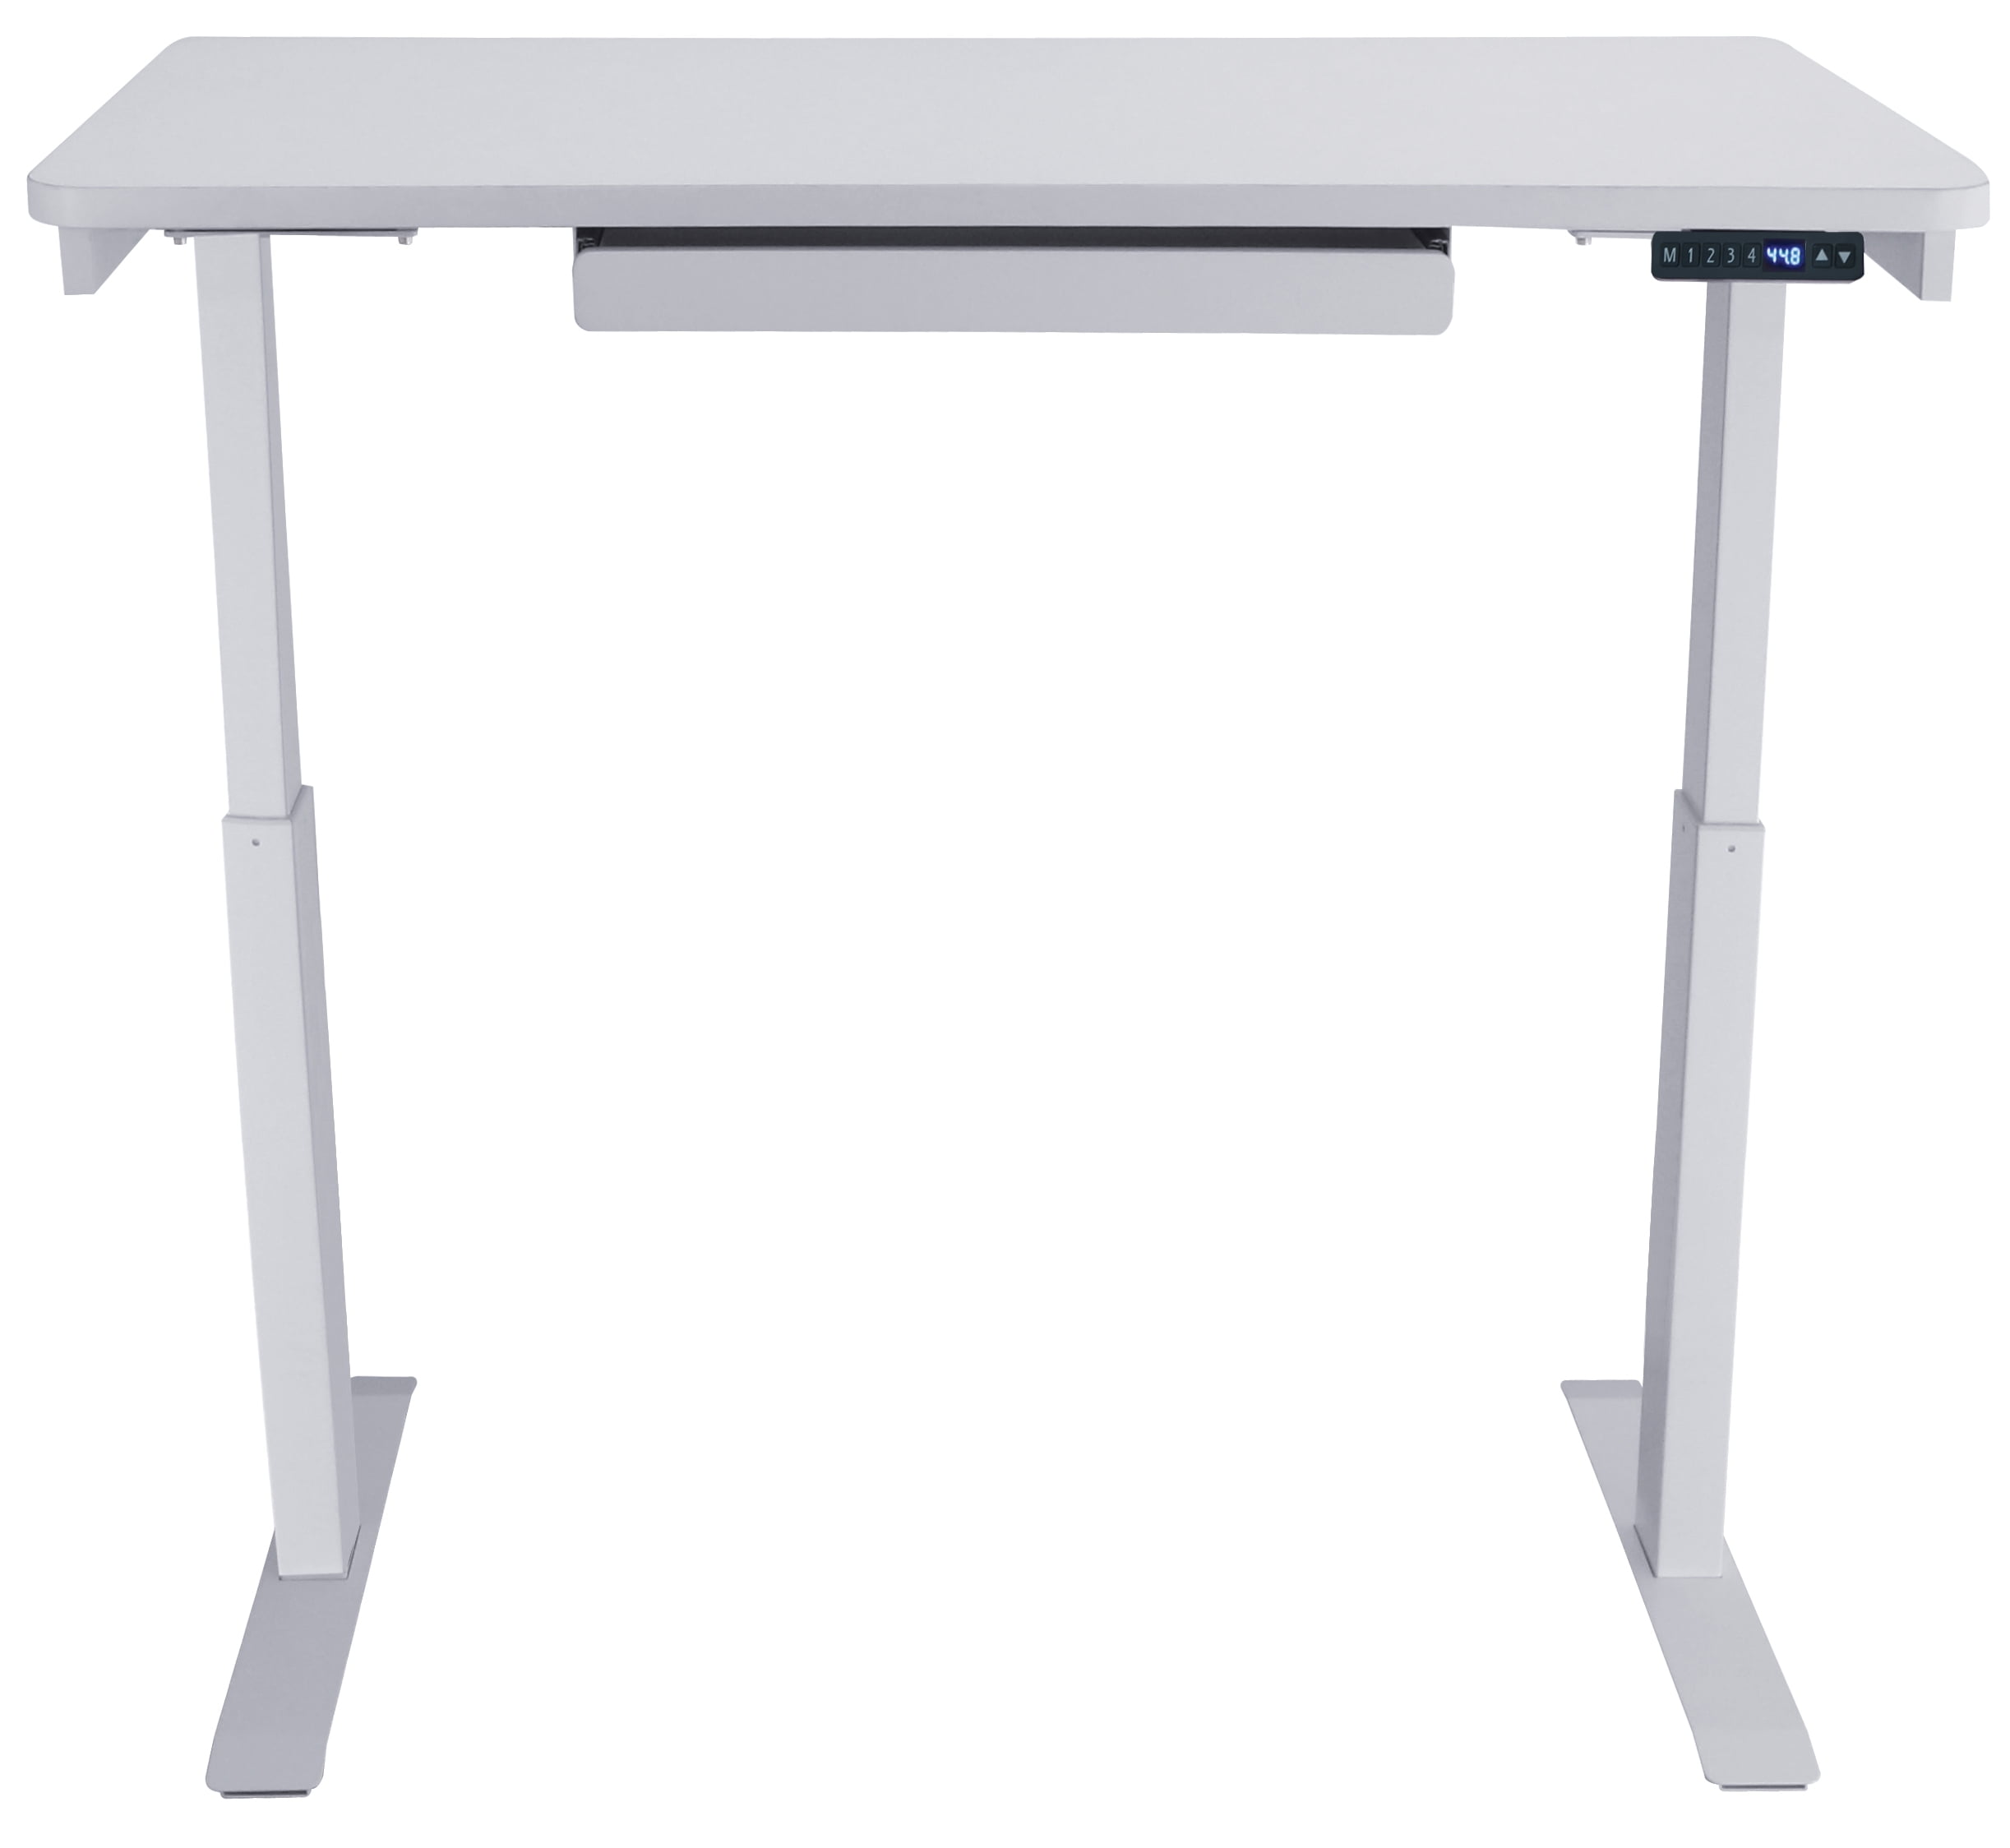 Motionwise SDG48B Electric Standing Desk 24”x48 Home Office Series Black Top with light Grey frame 28-48 with Quickly Program up to 4 pre-Set Height adjustments and USB Charge Port 